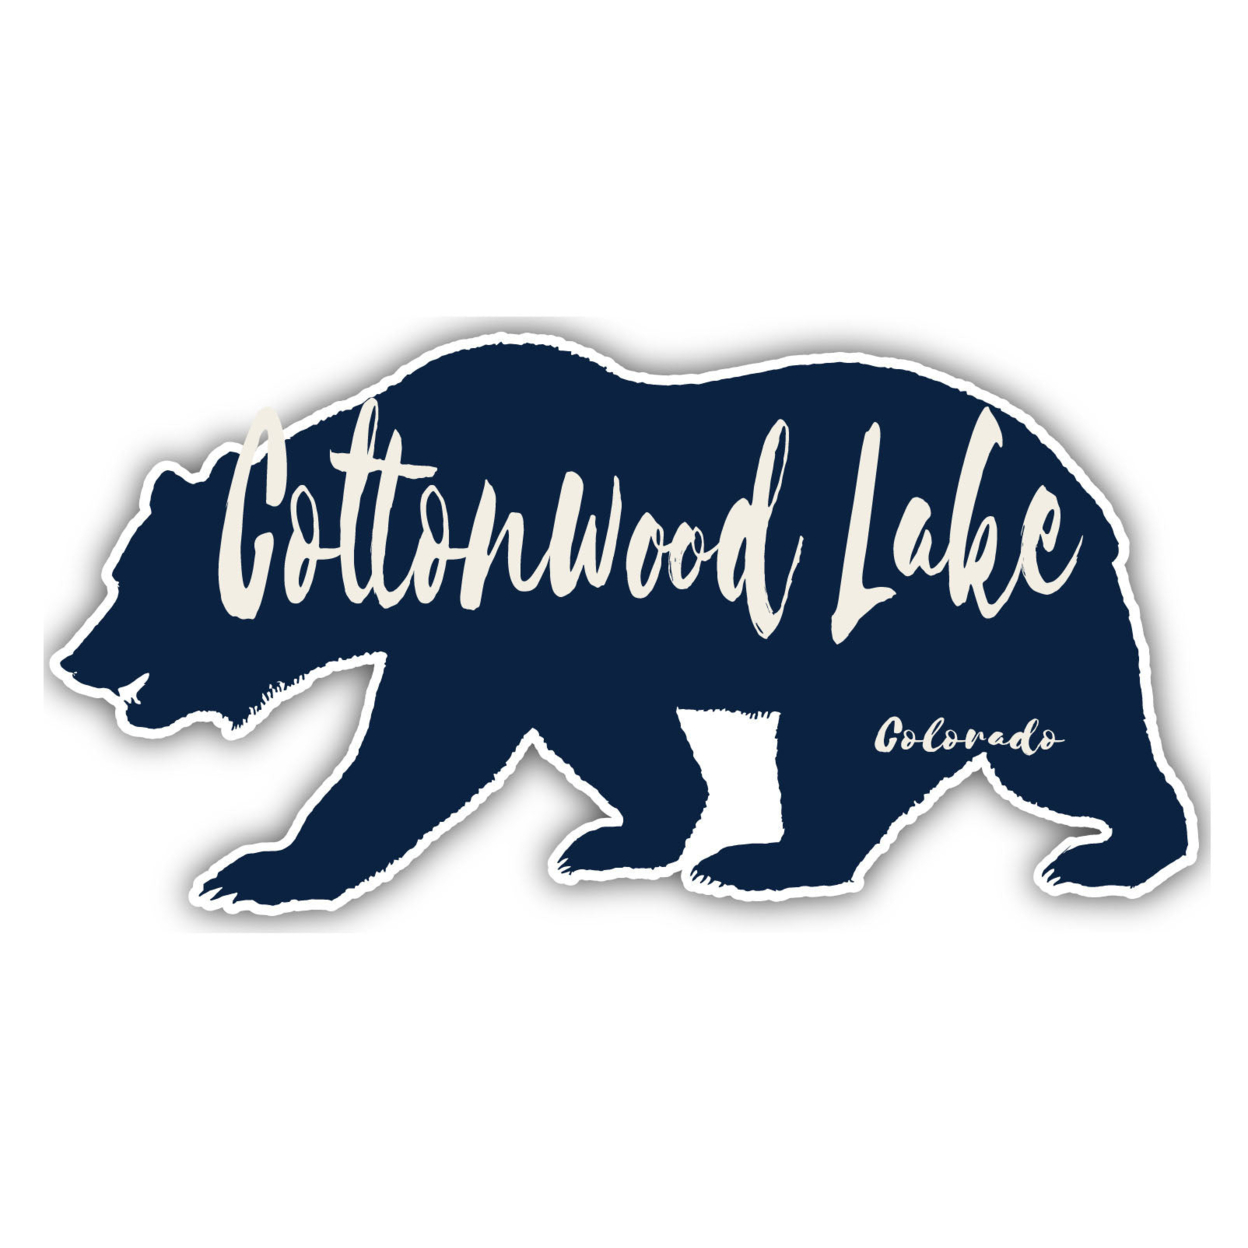 Cottonwood Lake Colorado Souvenir Decorative Stickers (Choose Theme And Size) - 4-Pack, 4-Inch, Camp Life